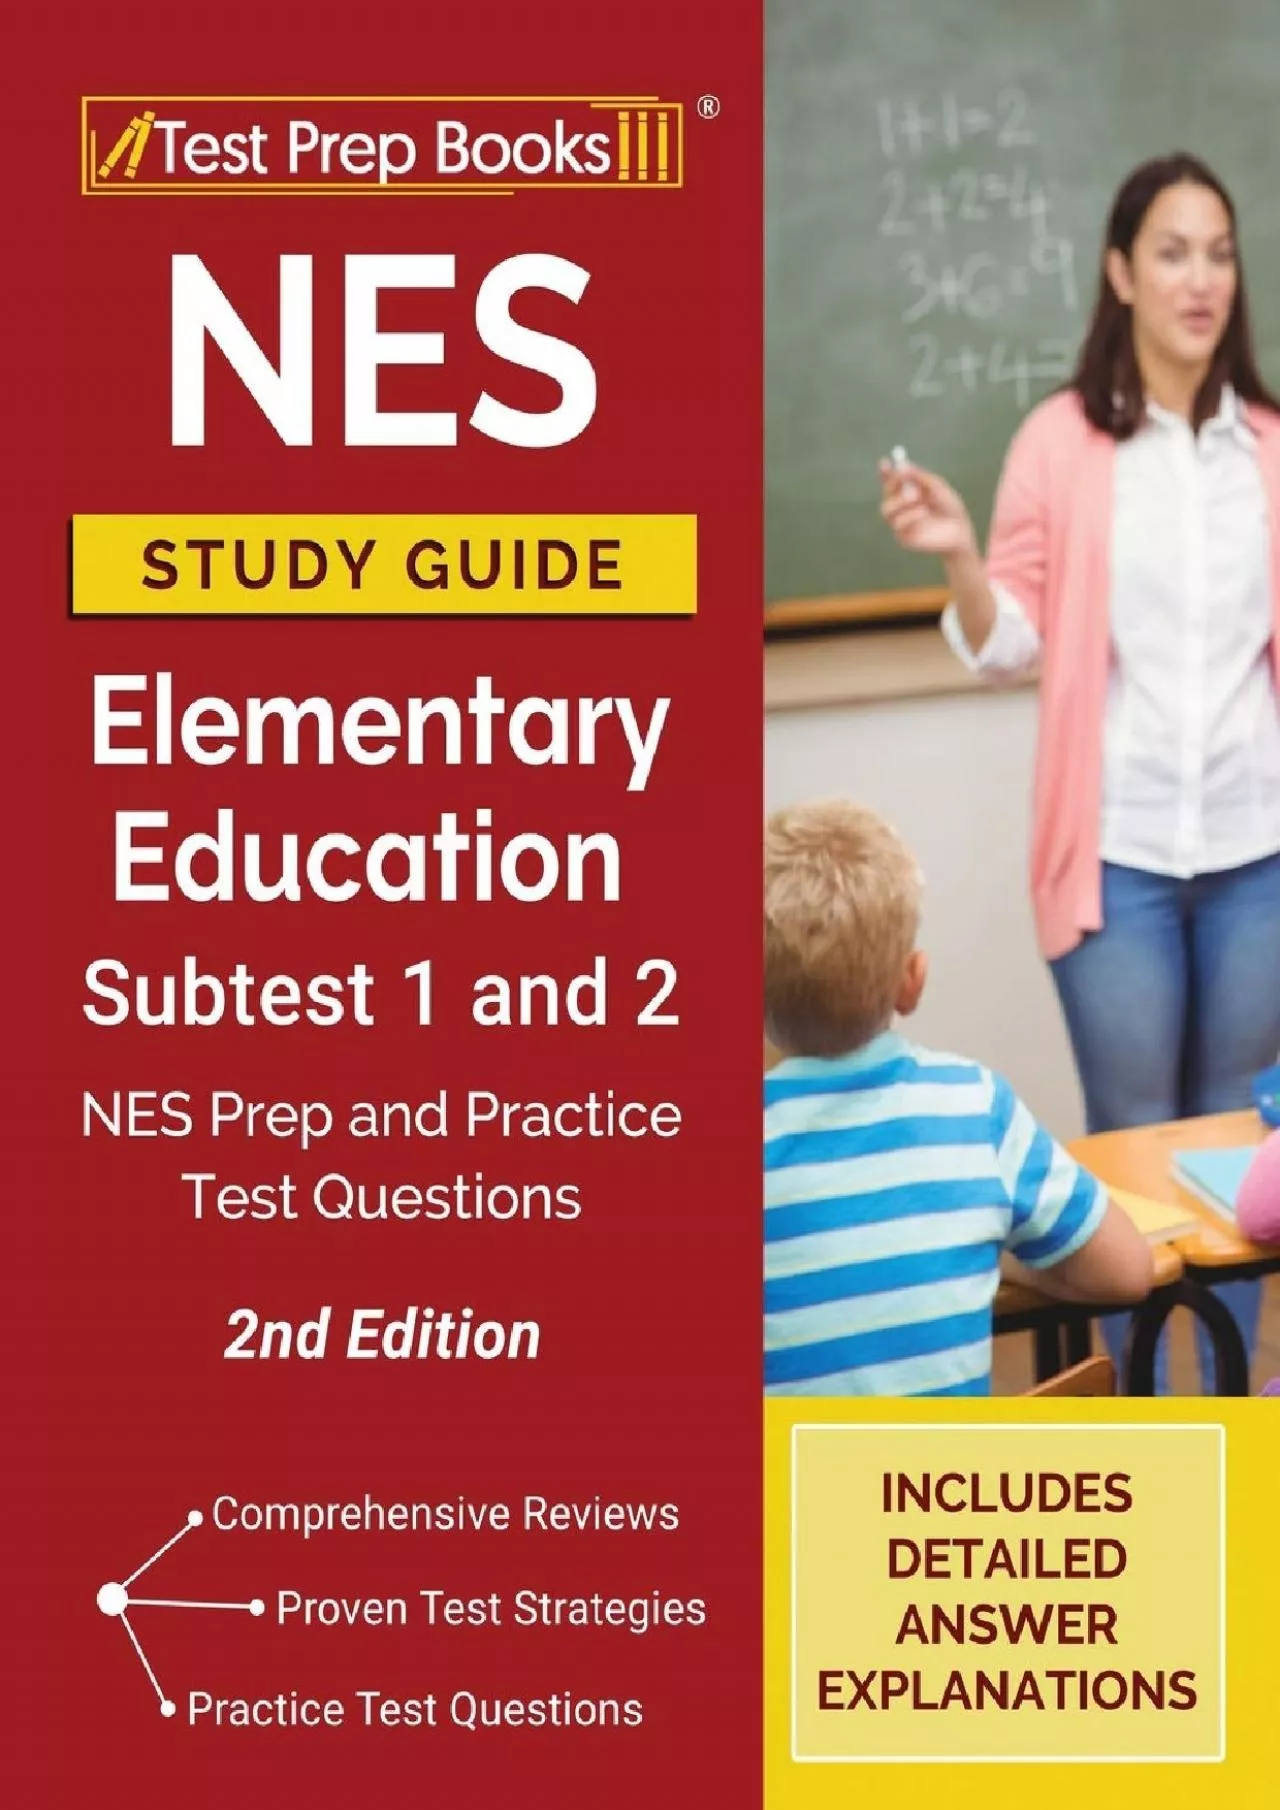 [READ] NES Study Guide Elementary Education Subtest 1 and 2: NES Prep and Practice Test